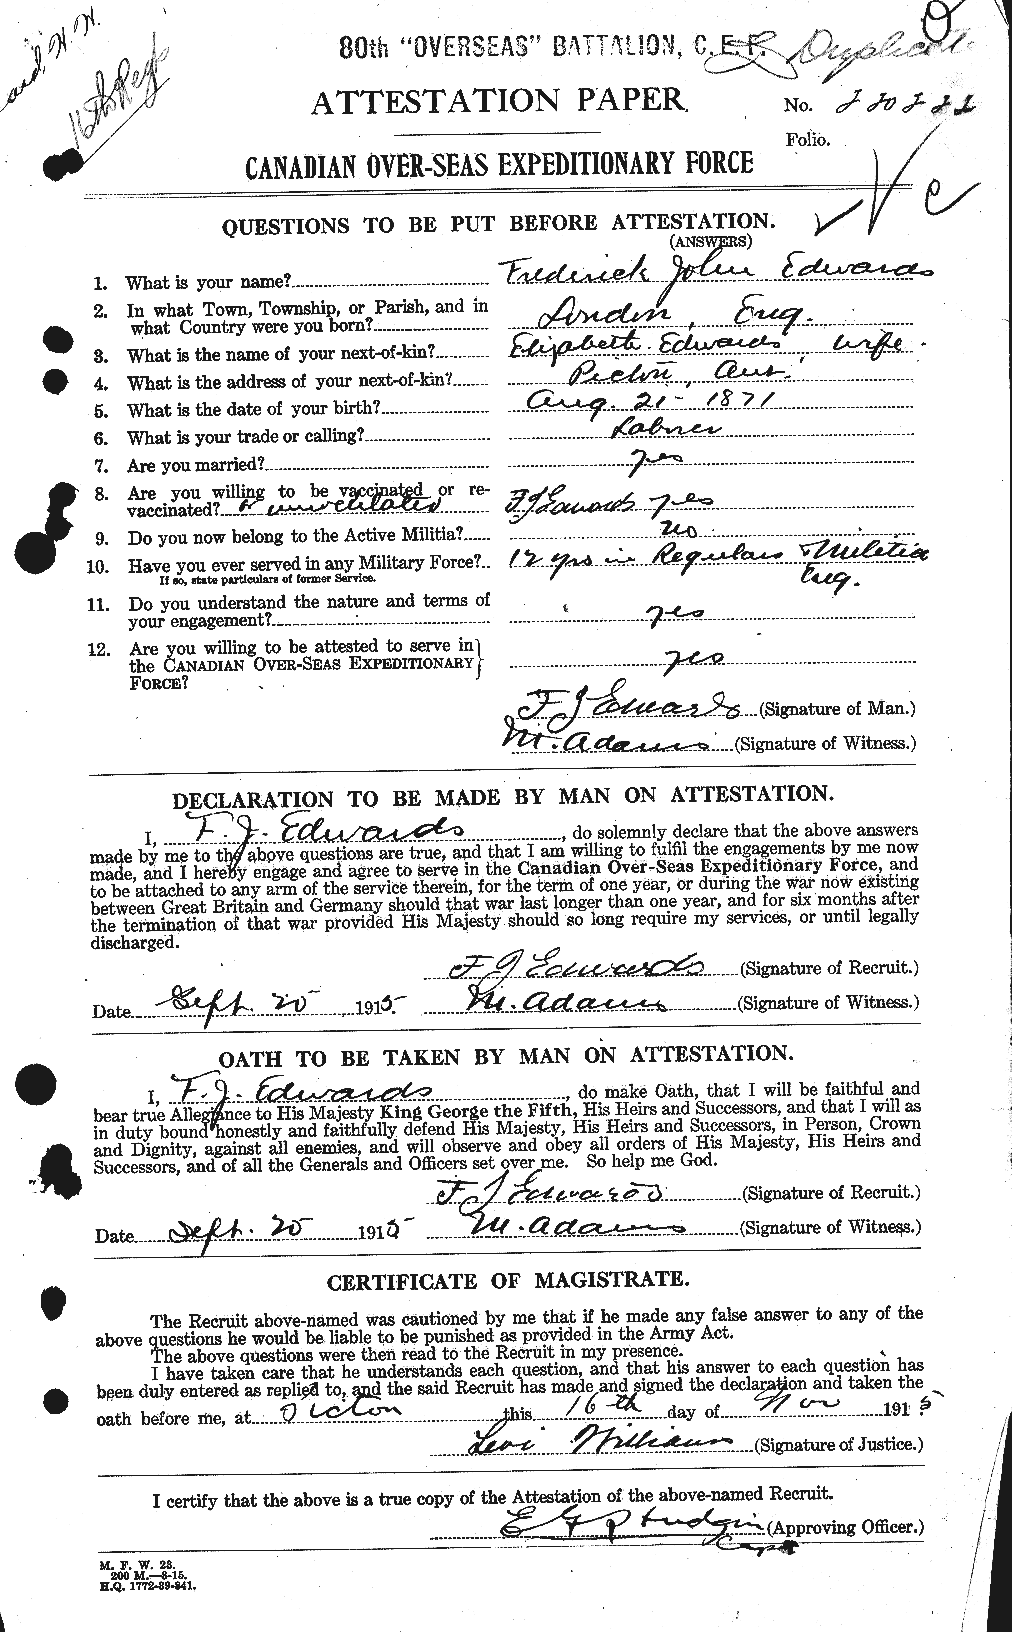 Personnel Records of the First World War - CEF 309076a